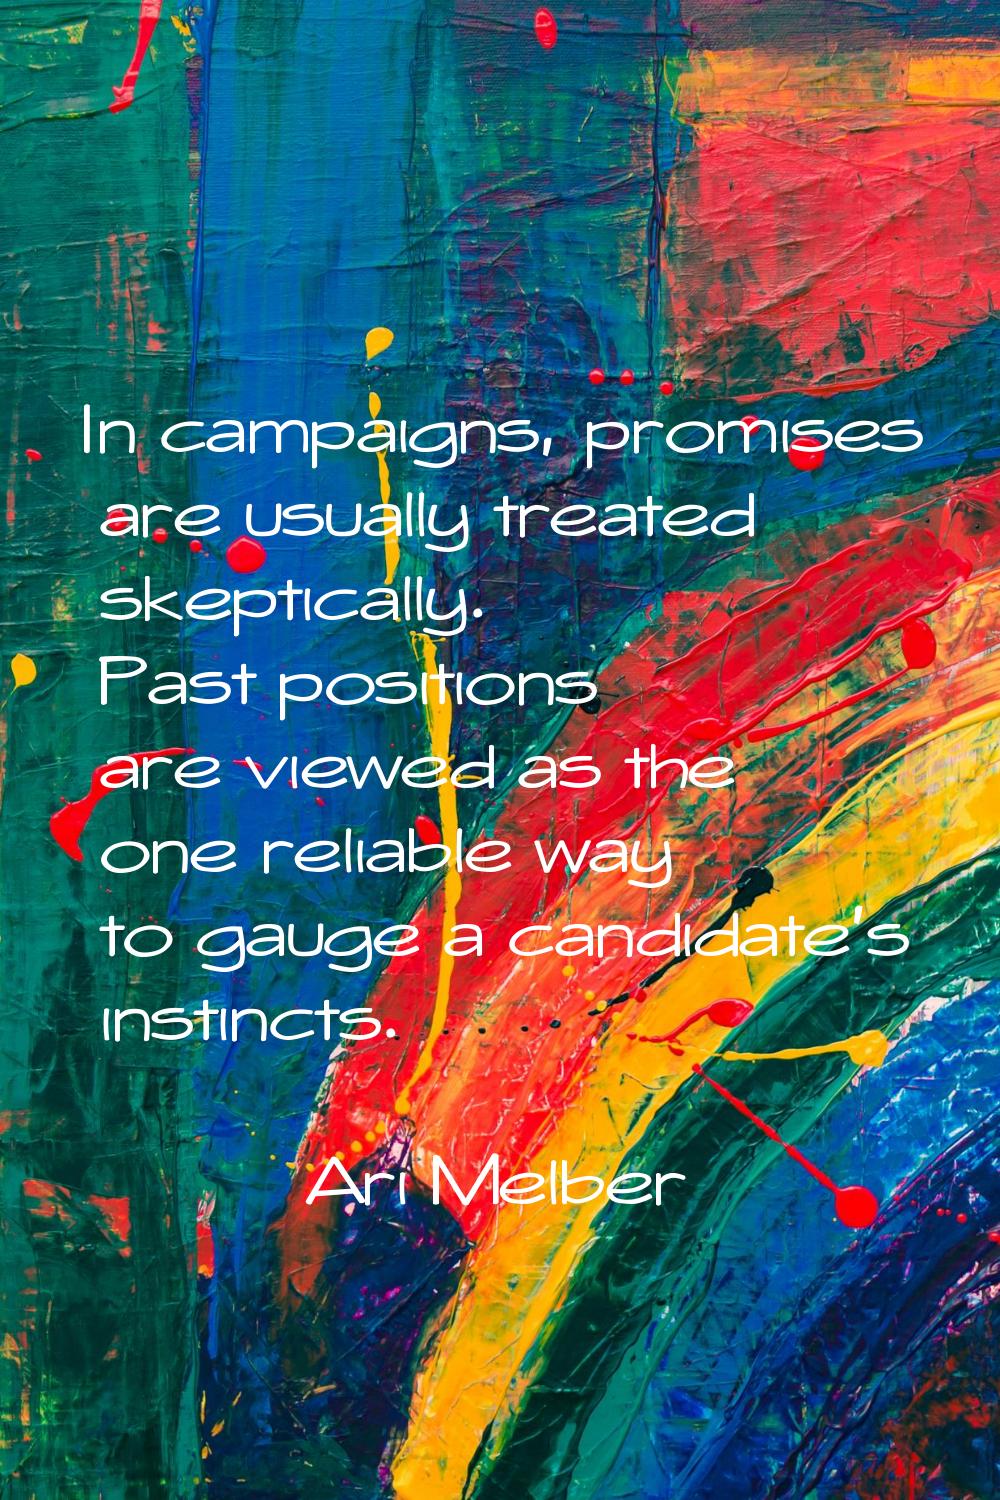 In campaigns, promises are usually treated skeptically. Past positions are viewed as the one reliab